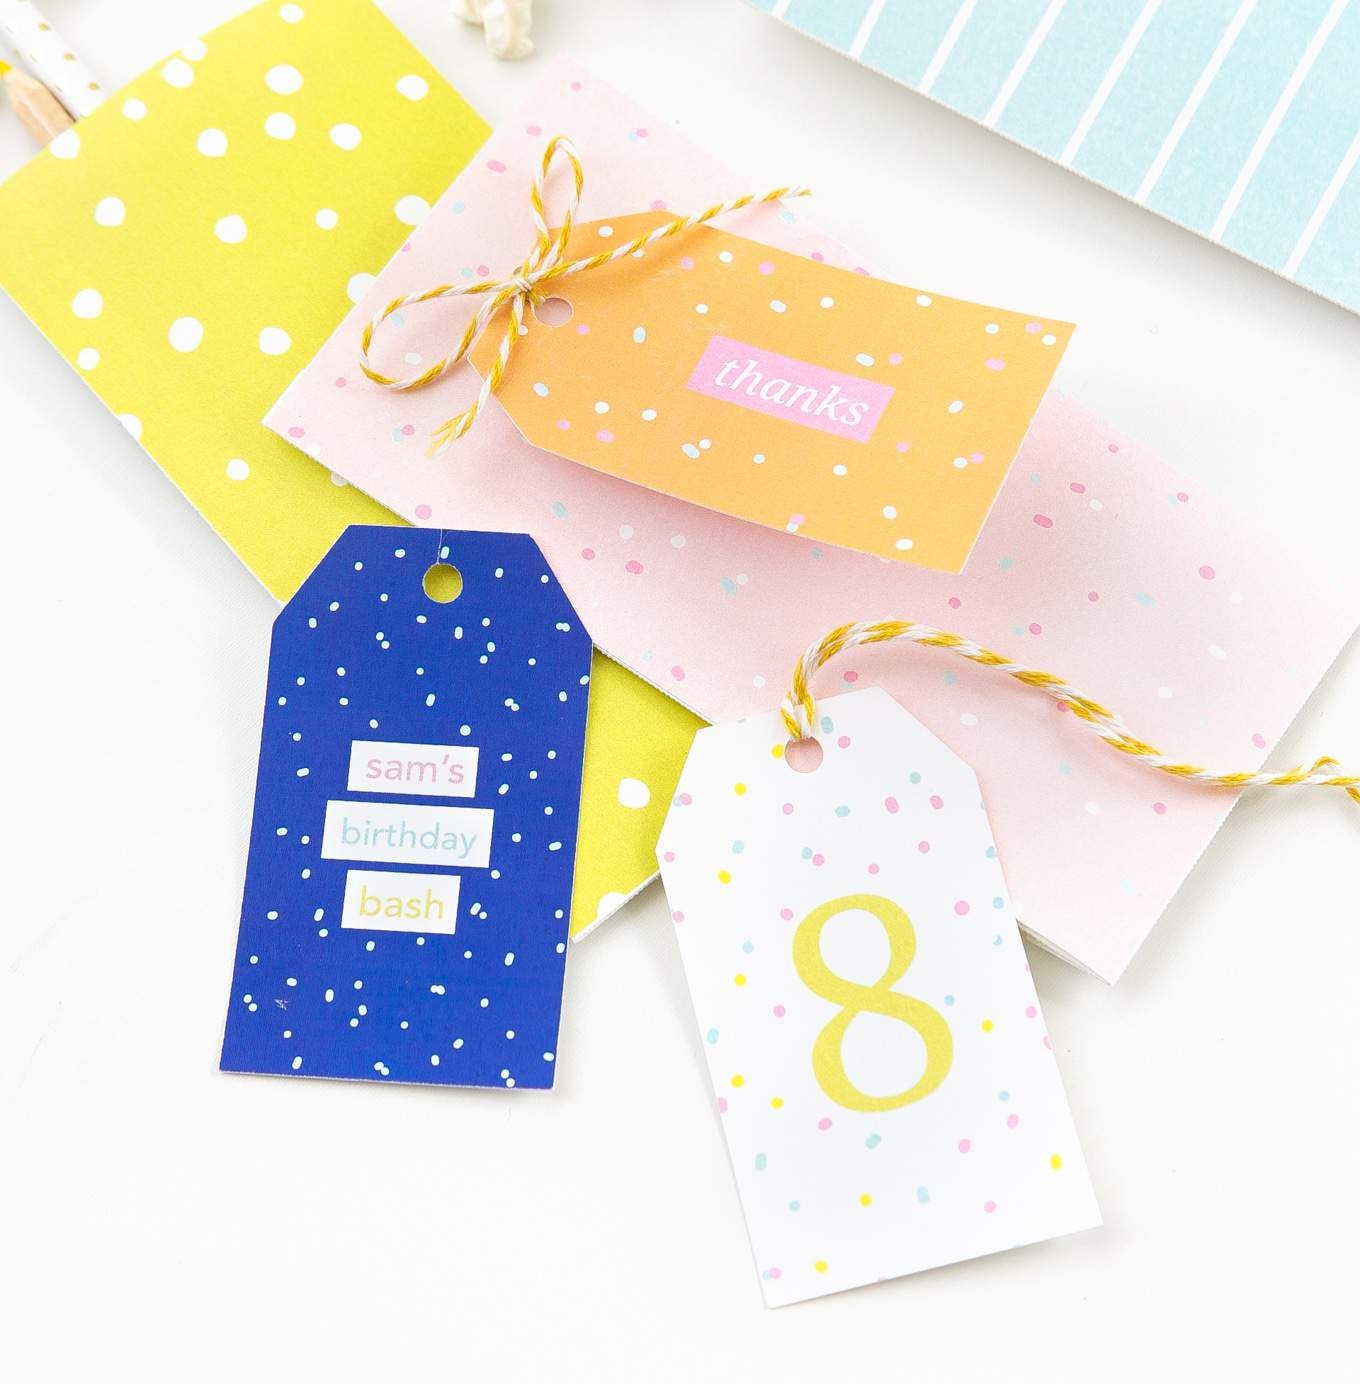 8 Colorful &amp;amp; Free Printable Gift Tags For Any Occasion! - Free Printable Goodie Bag Tags